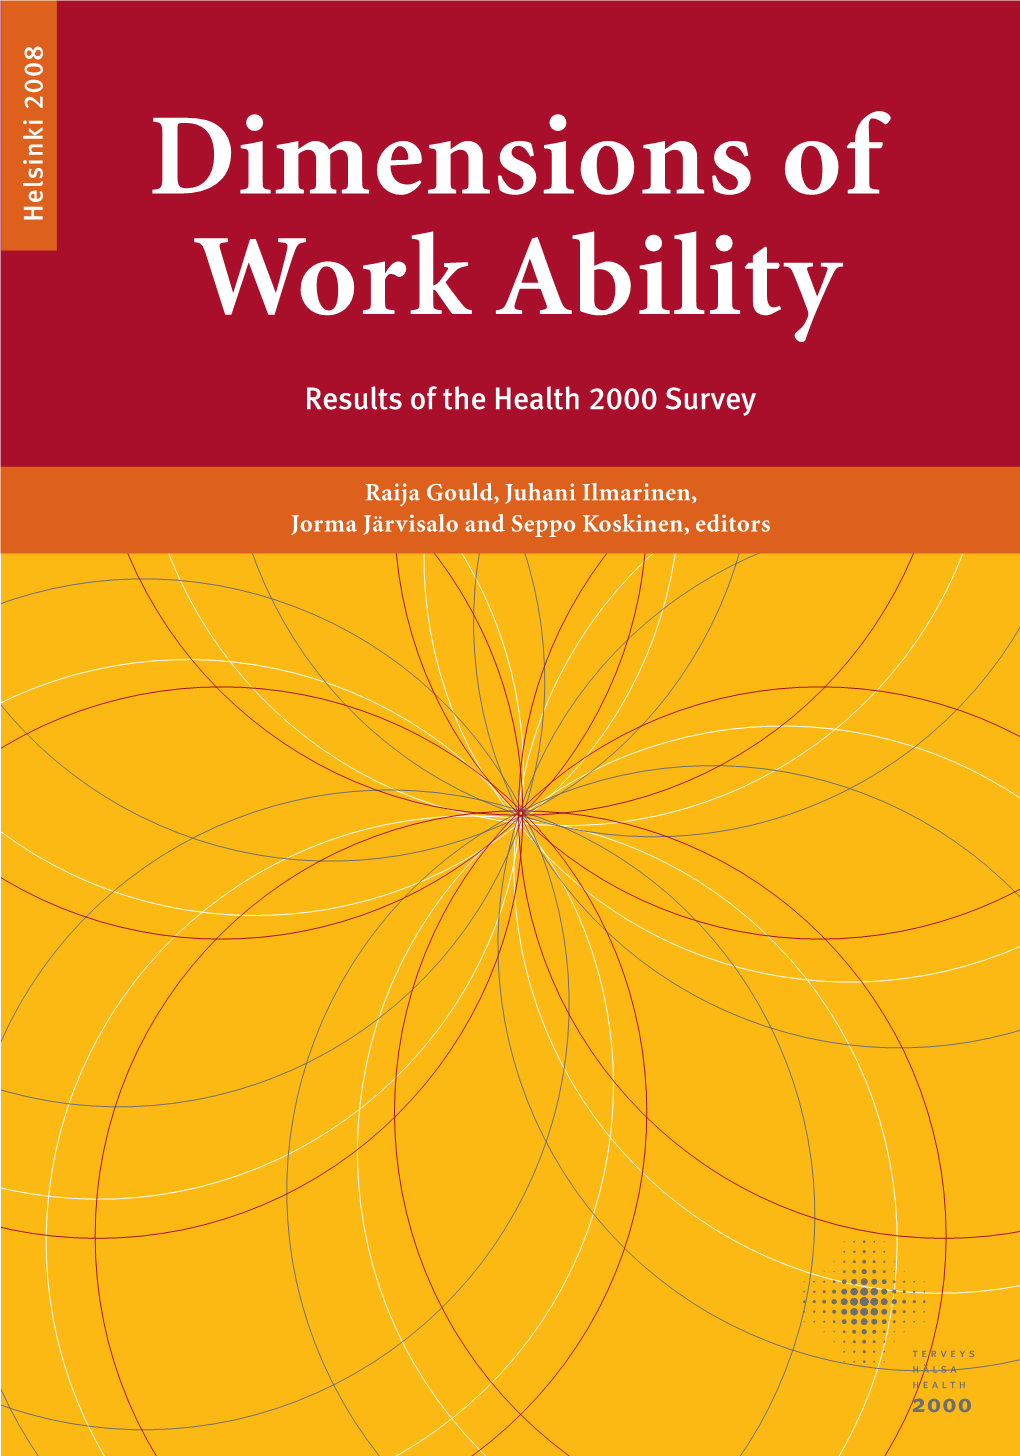 Dimensions of Work Ability. Results of the Health 2000 Survey]